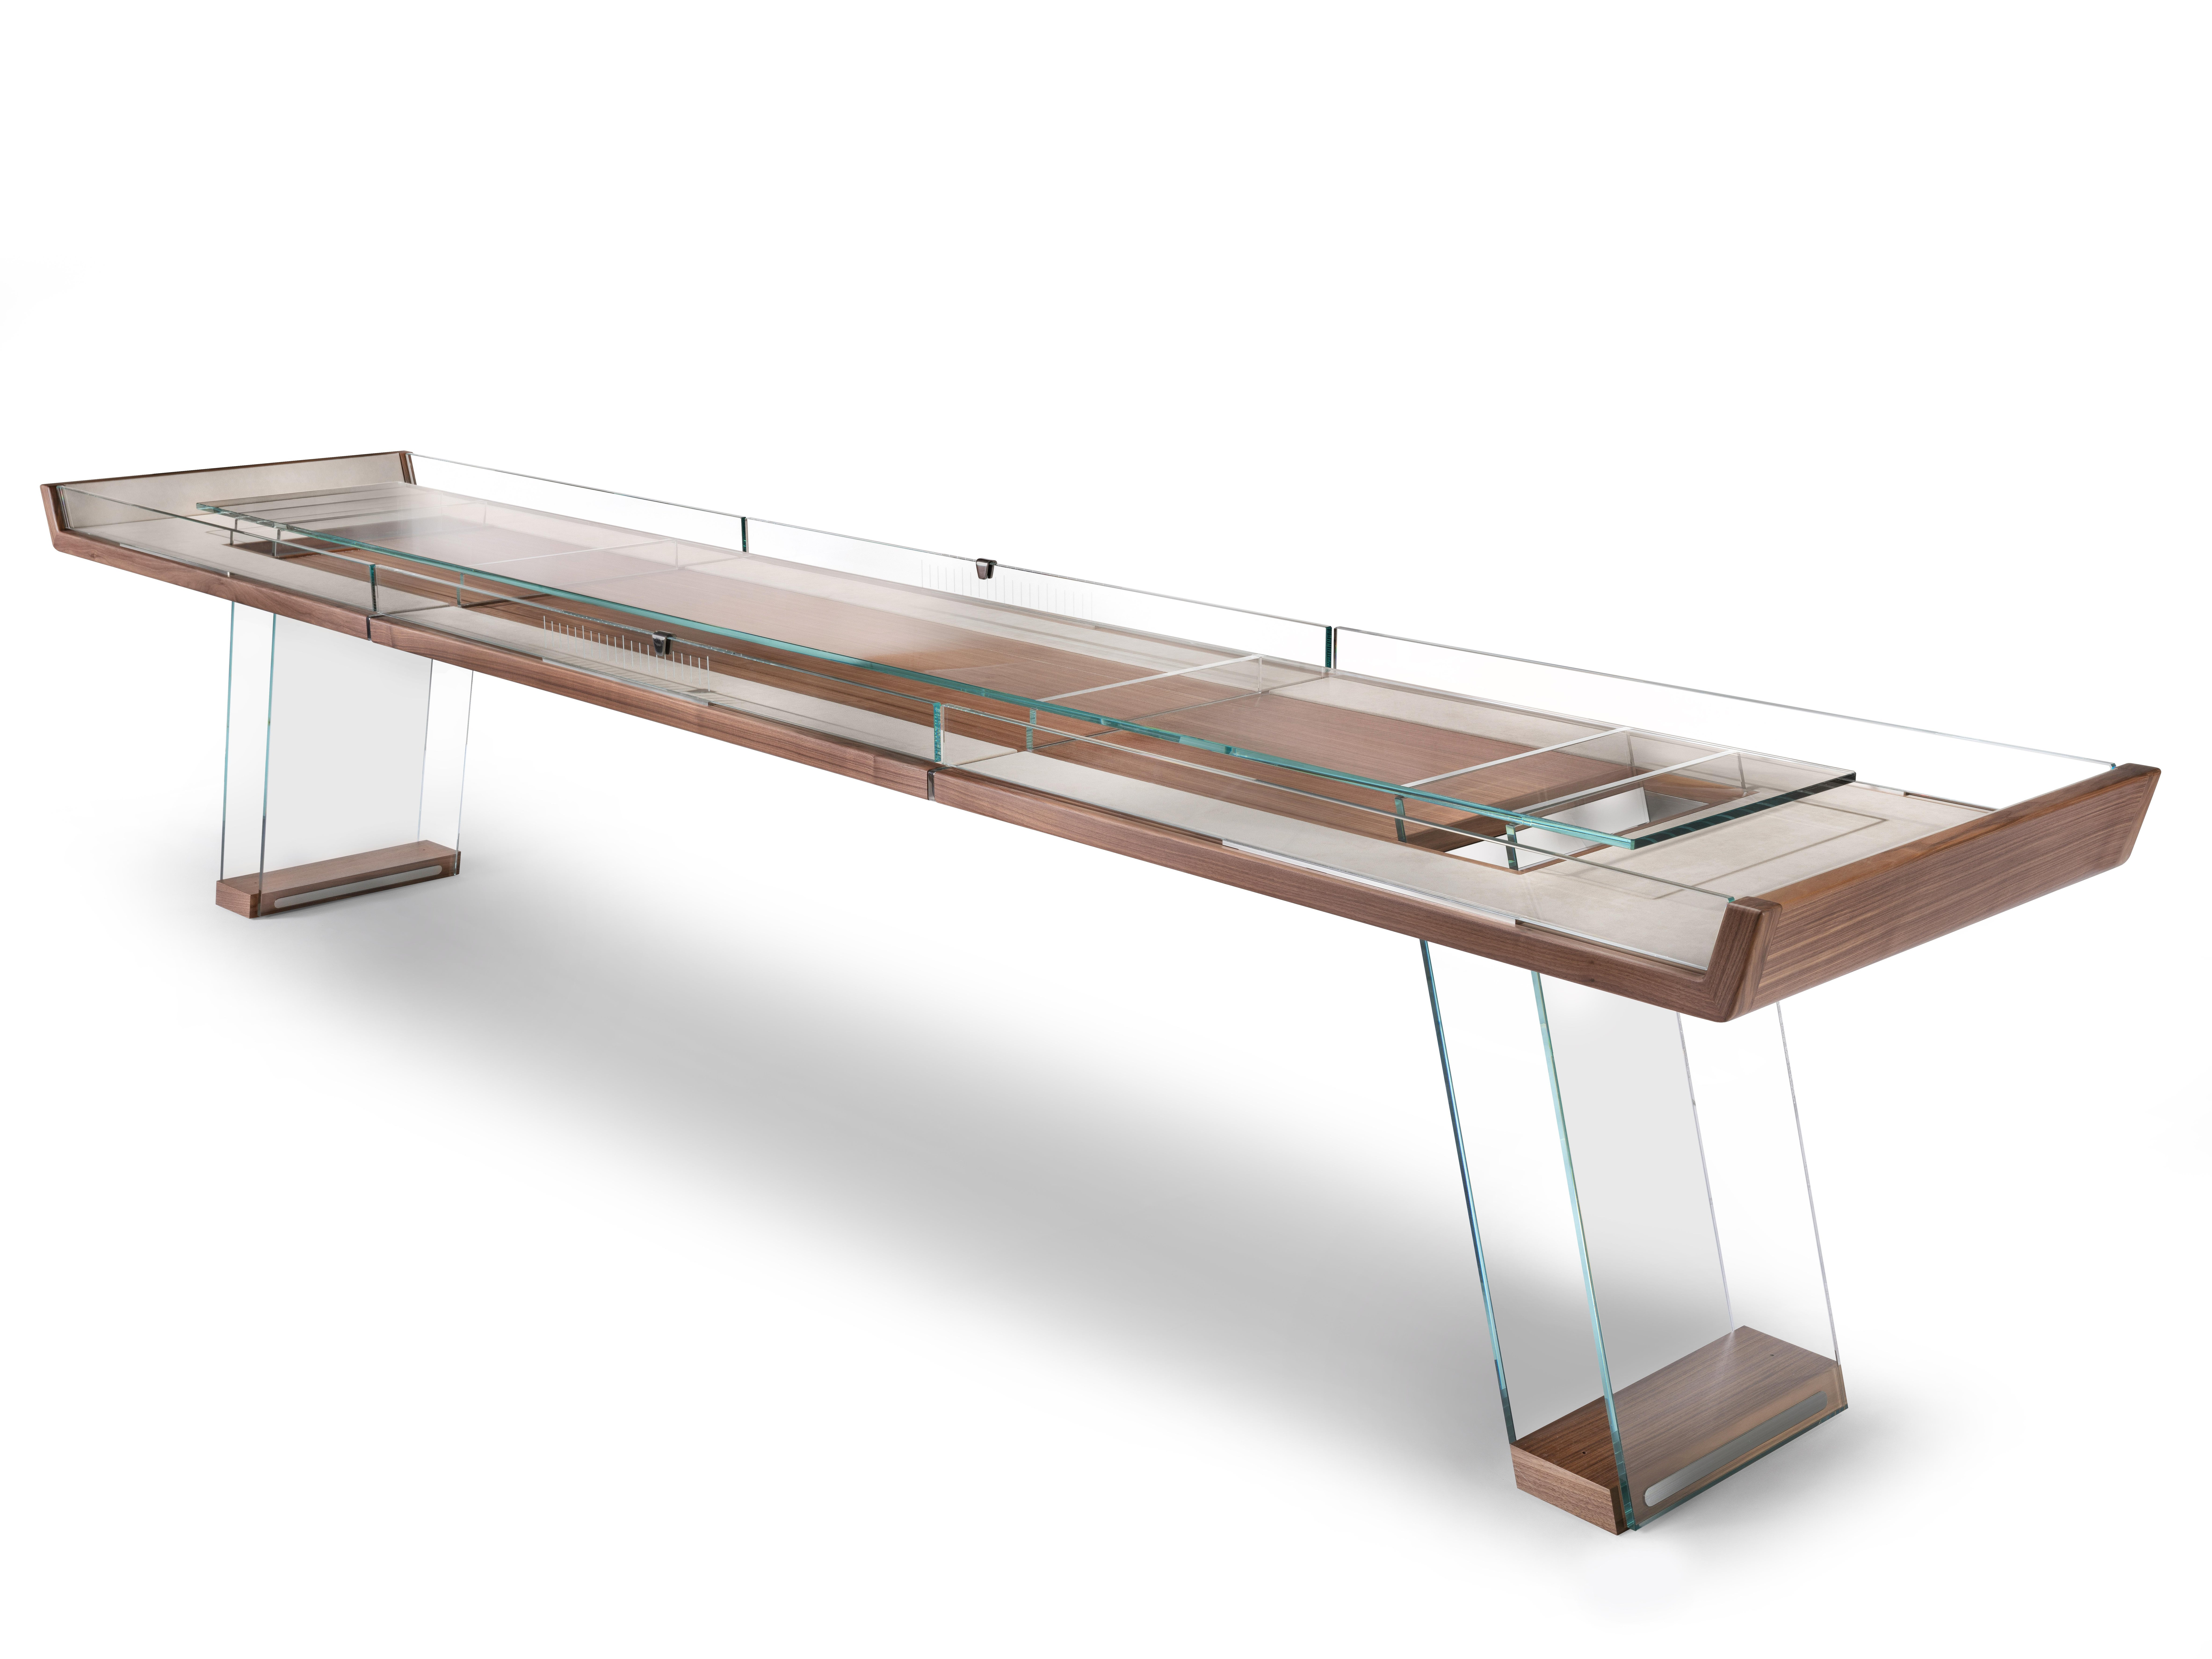 The SCIVOLO shuffleboard by Impatia embodies innovation, elevating the gaming experience with a blend of
uniqueness and professionalism. This design not only provides players with a distinctive playstyle but also allows
both players and spectators